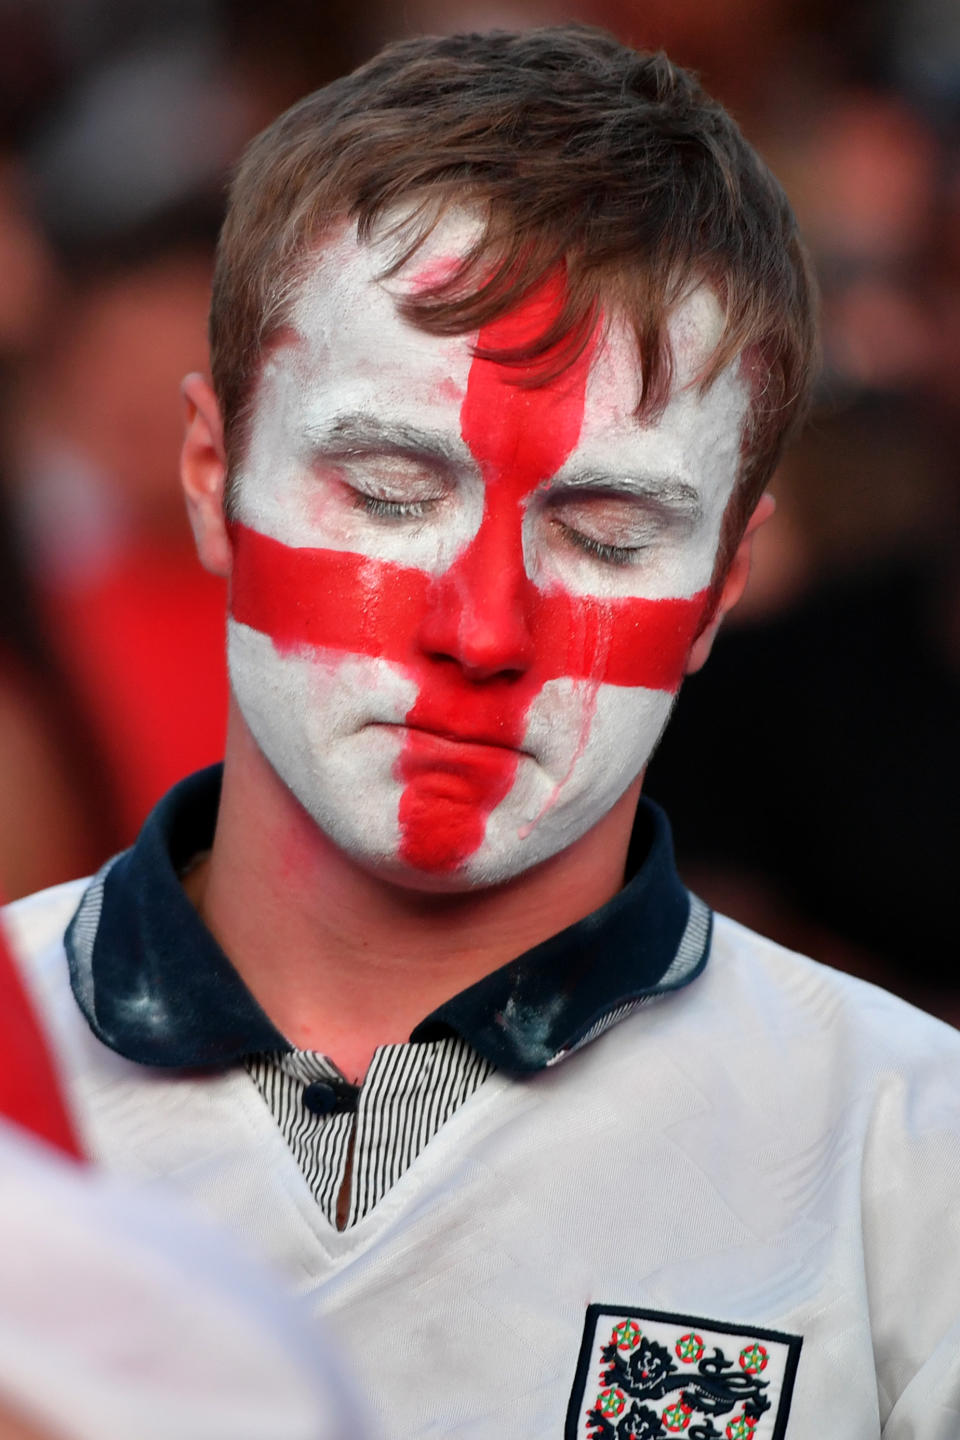 <p>Football fans react as they watch England lose to Croatia at the Auto Trader World Cup semi-final screening in Castlefield Bowl on July 11, 2018 in Manchester, United Kingdom. World Cup fever is building among England fans after reaching the Semi Finals of the Russia 2018 FIFA World Cup (Photo by Anthony Devlin/Getty Images) </p>